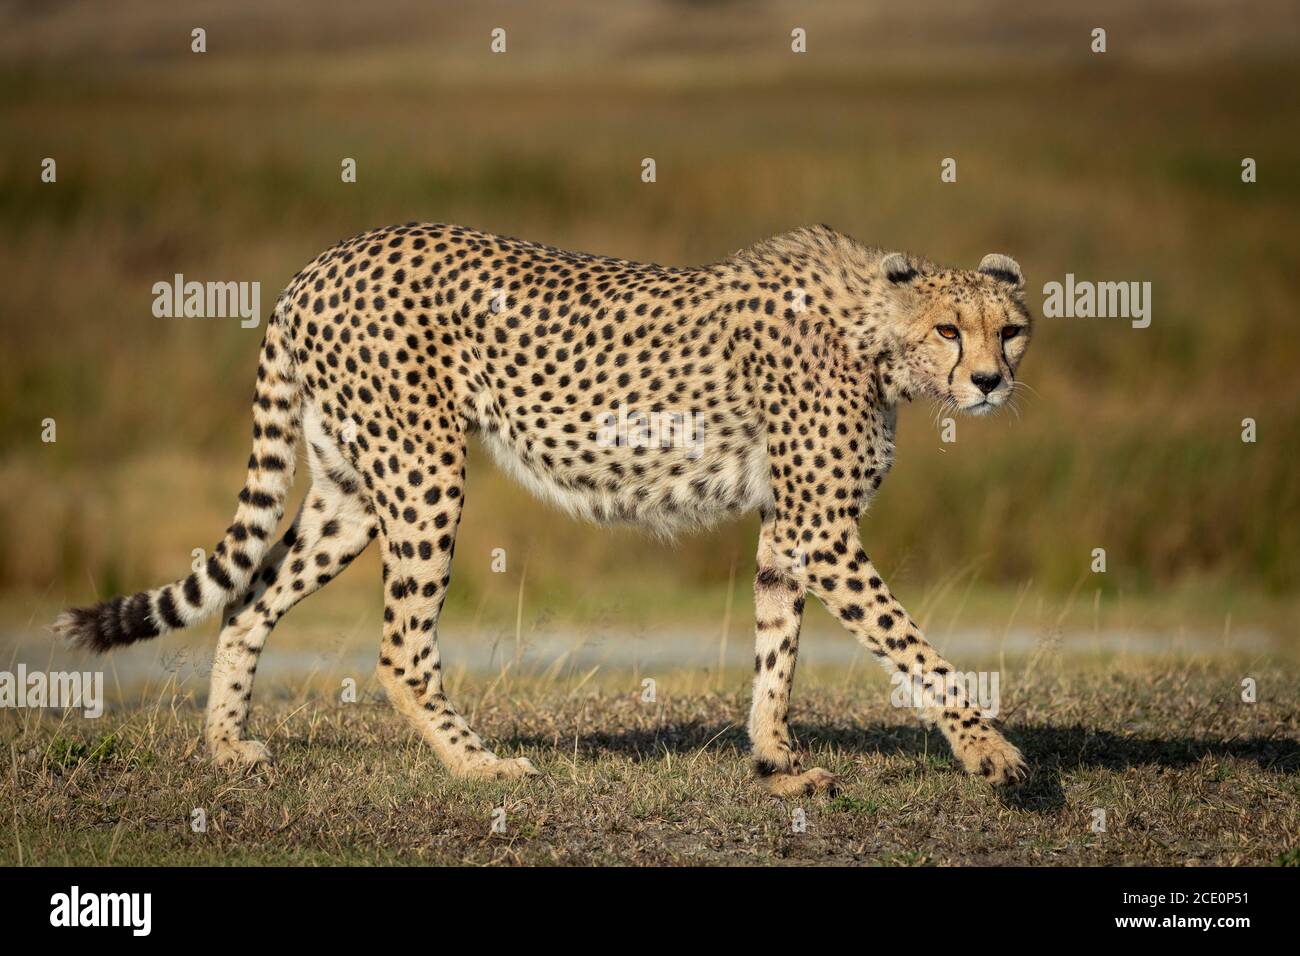 Full body side view of an adult cheetah with long whiskers and orange eyes walking in Ndutu Tanzania Stock Photo